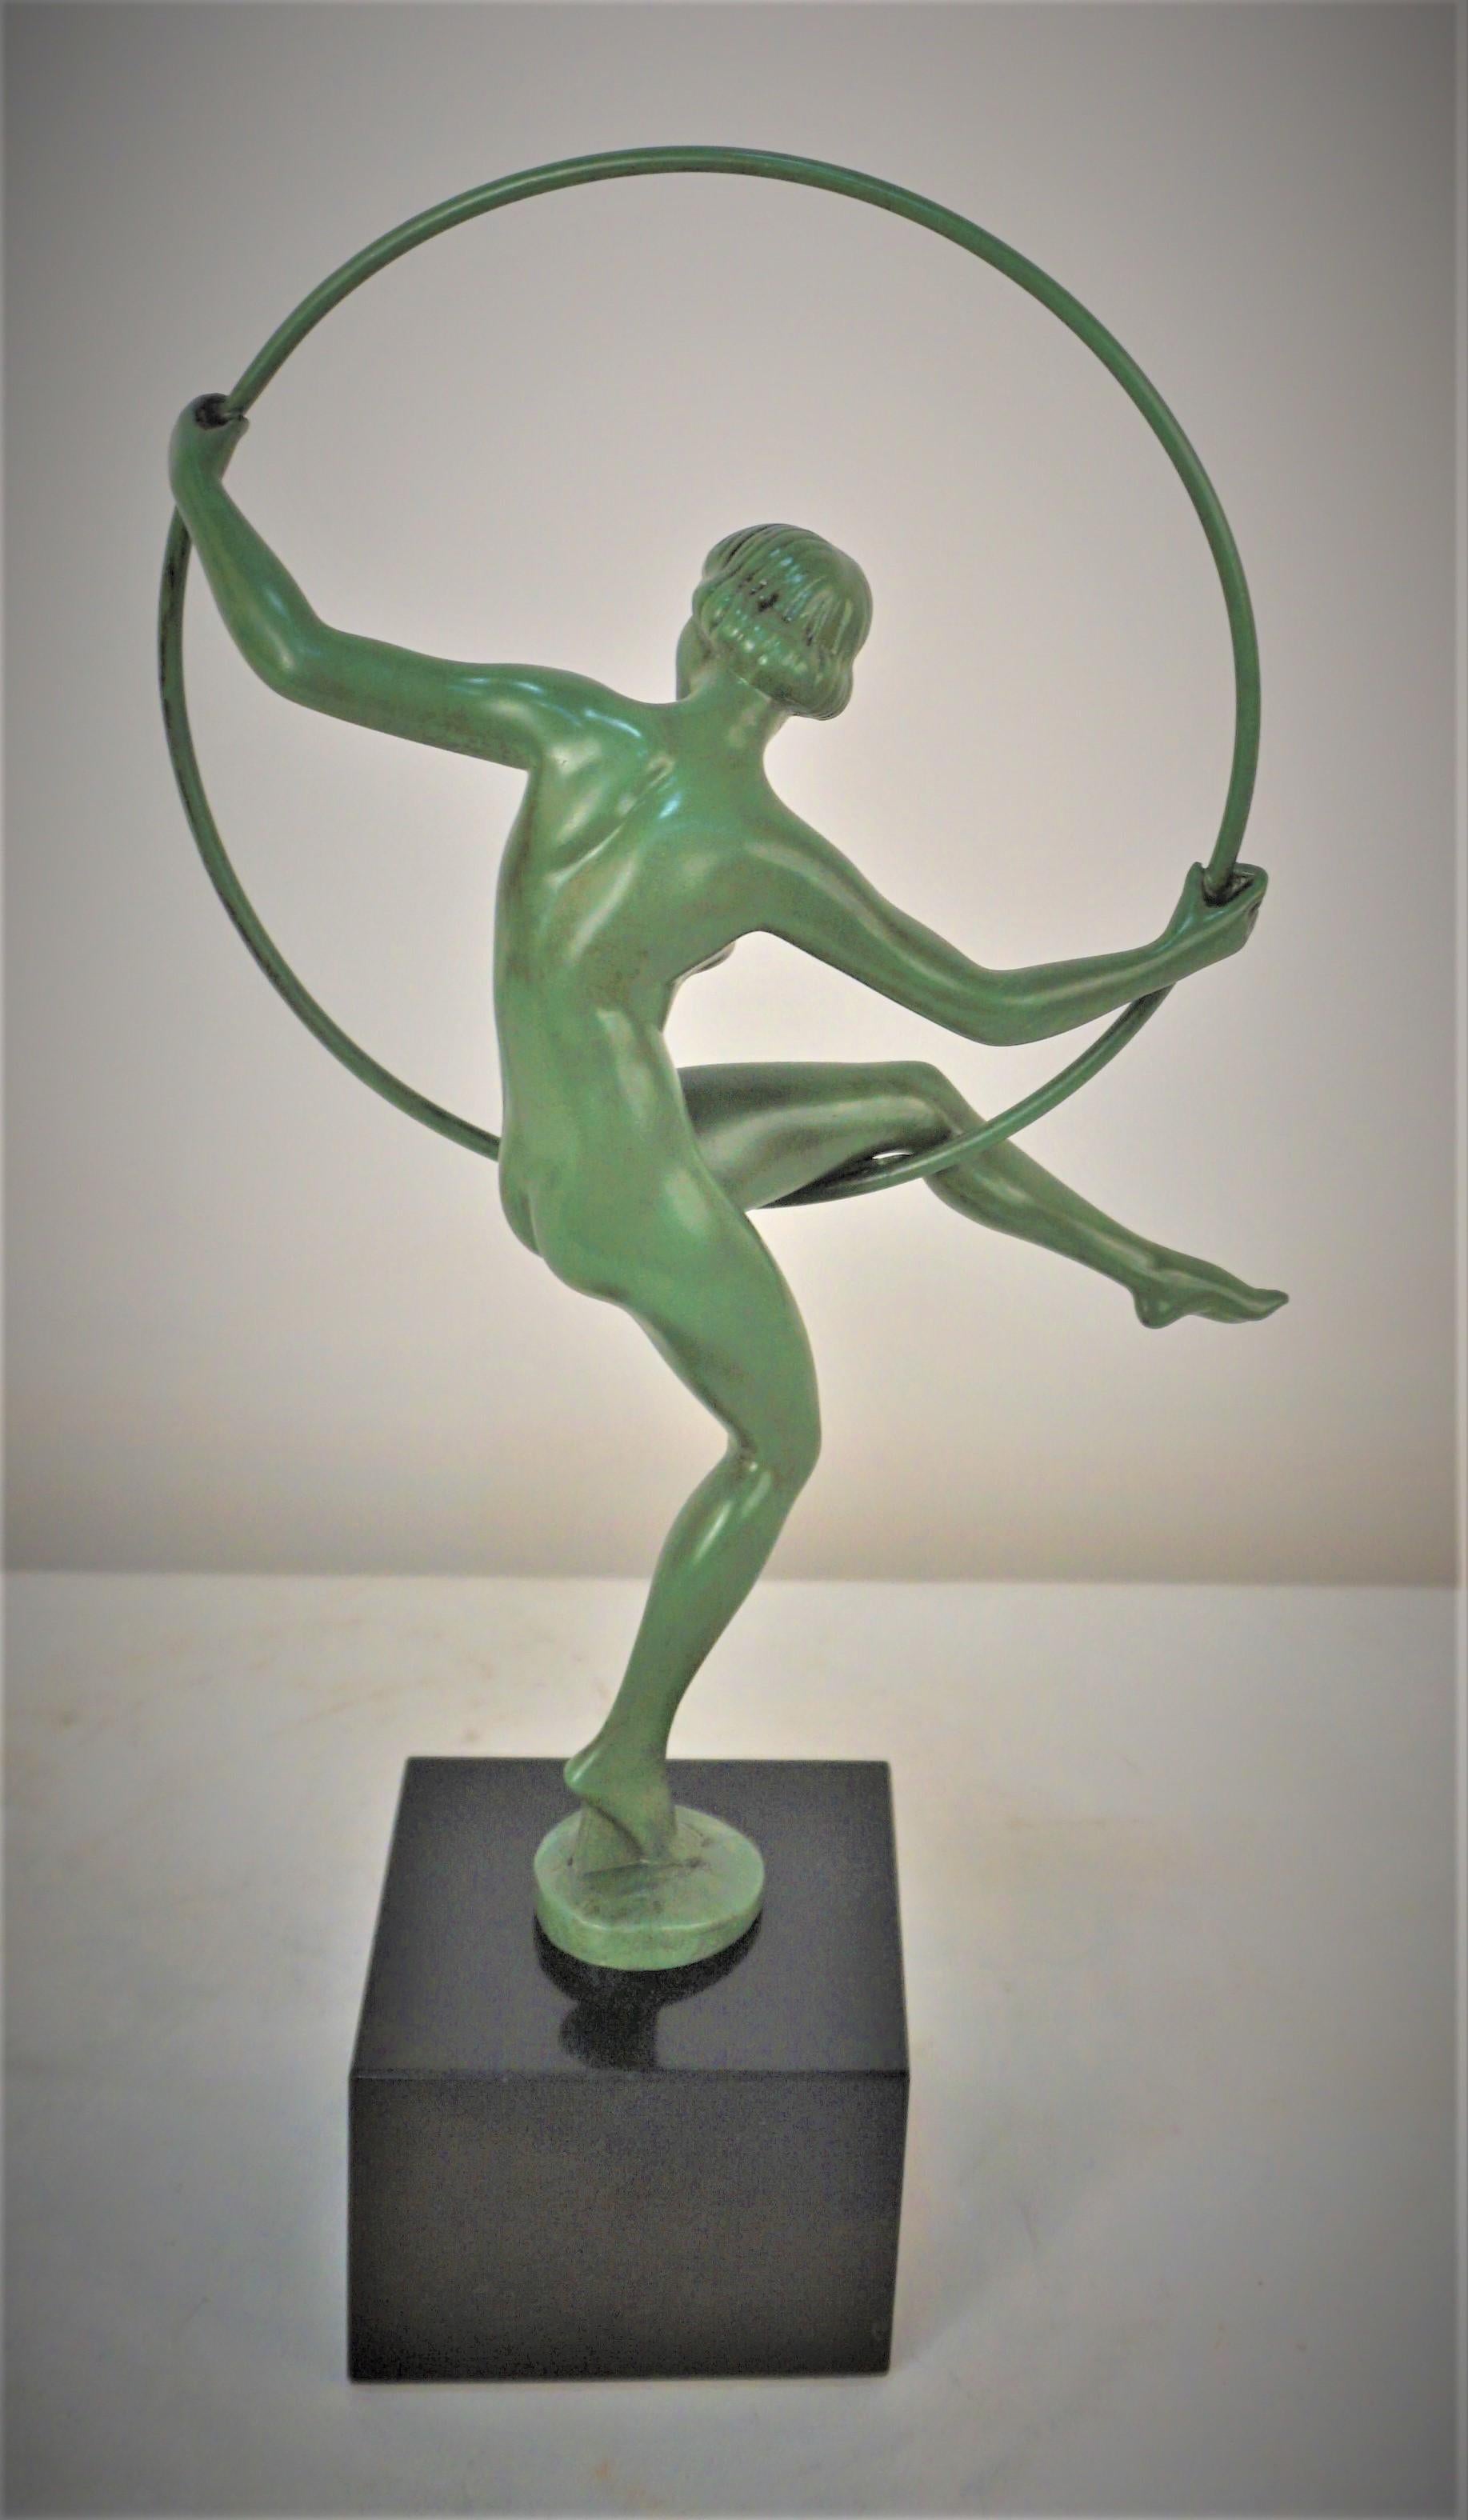 Cold-Painted French 1930's Art Deco Sculpture Hoop Dancer Briand, Marcel Andre Bouraine For Sale